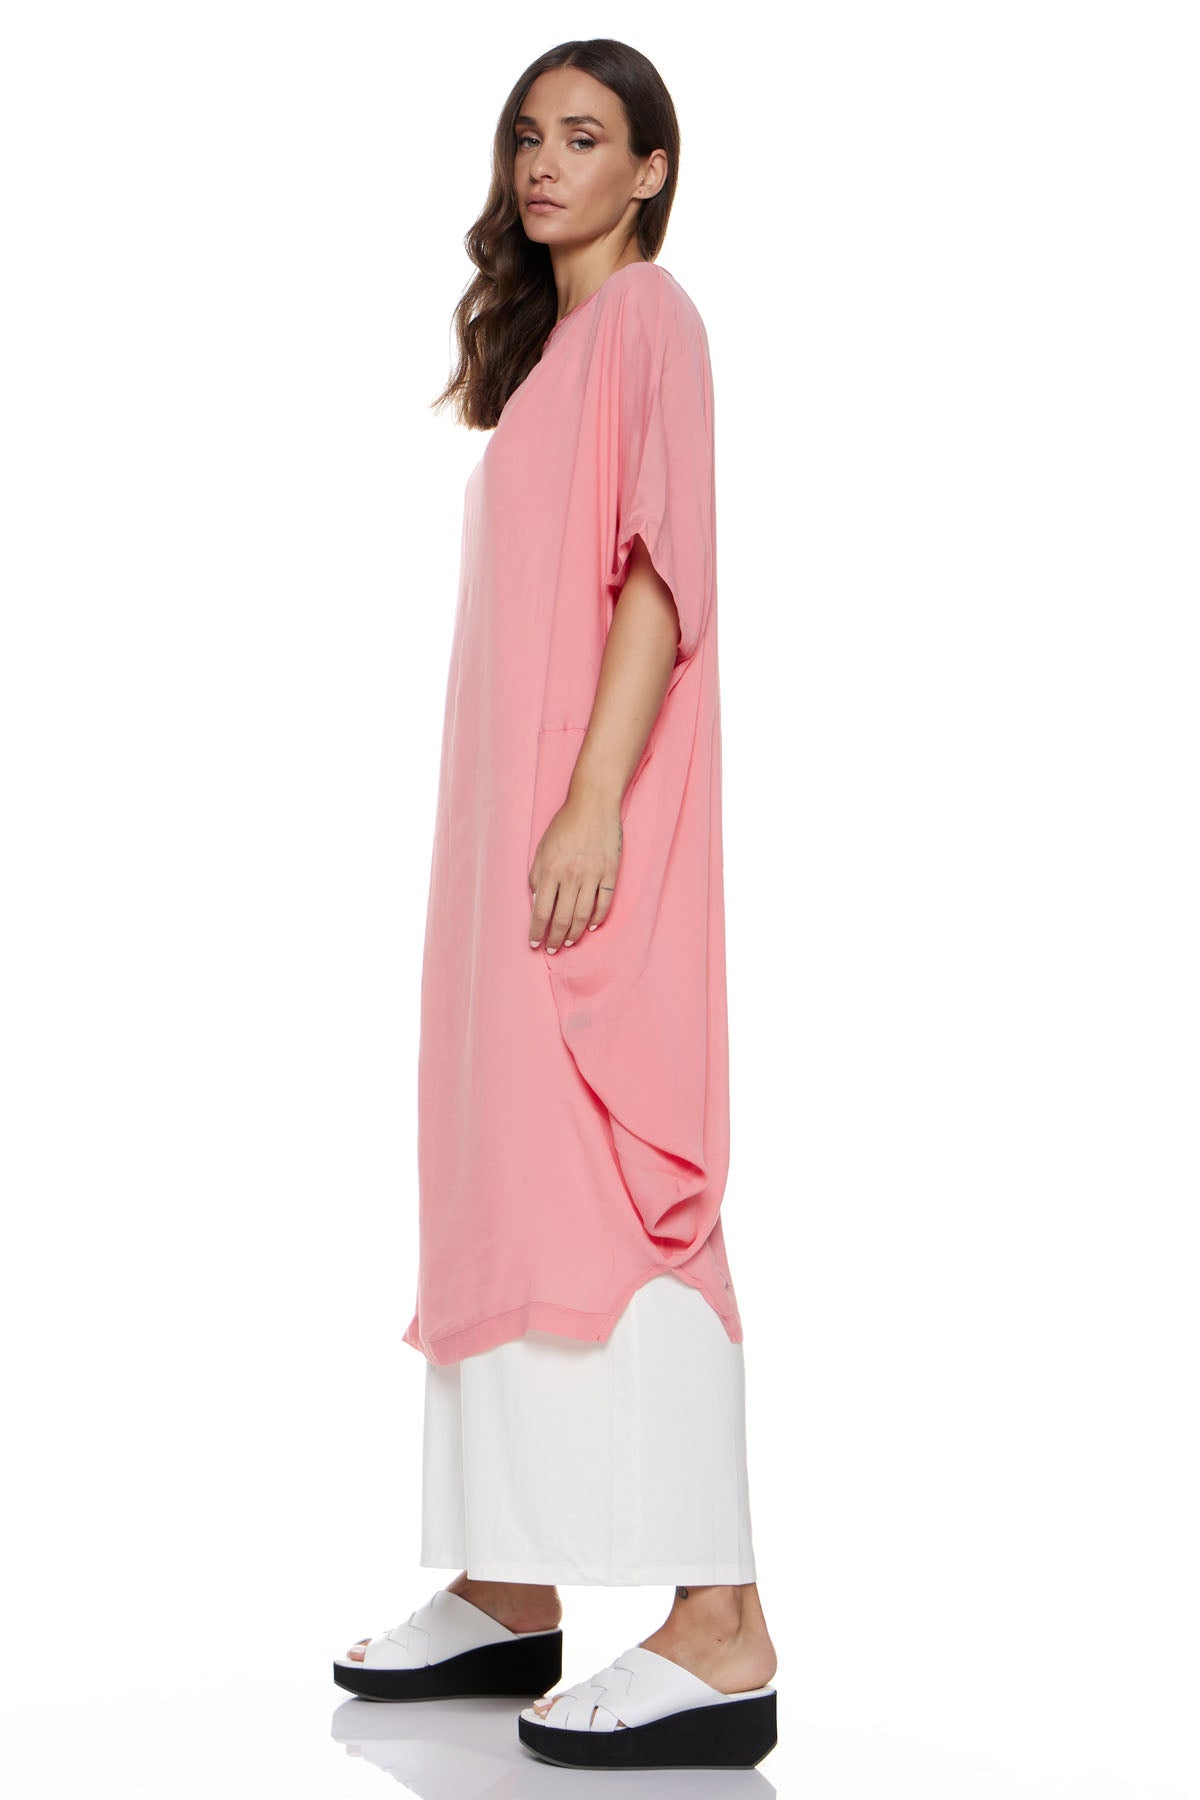 Chic & Simple Combination Dress Circle & Dress (Basics) Fationa - Pink with White